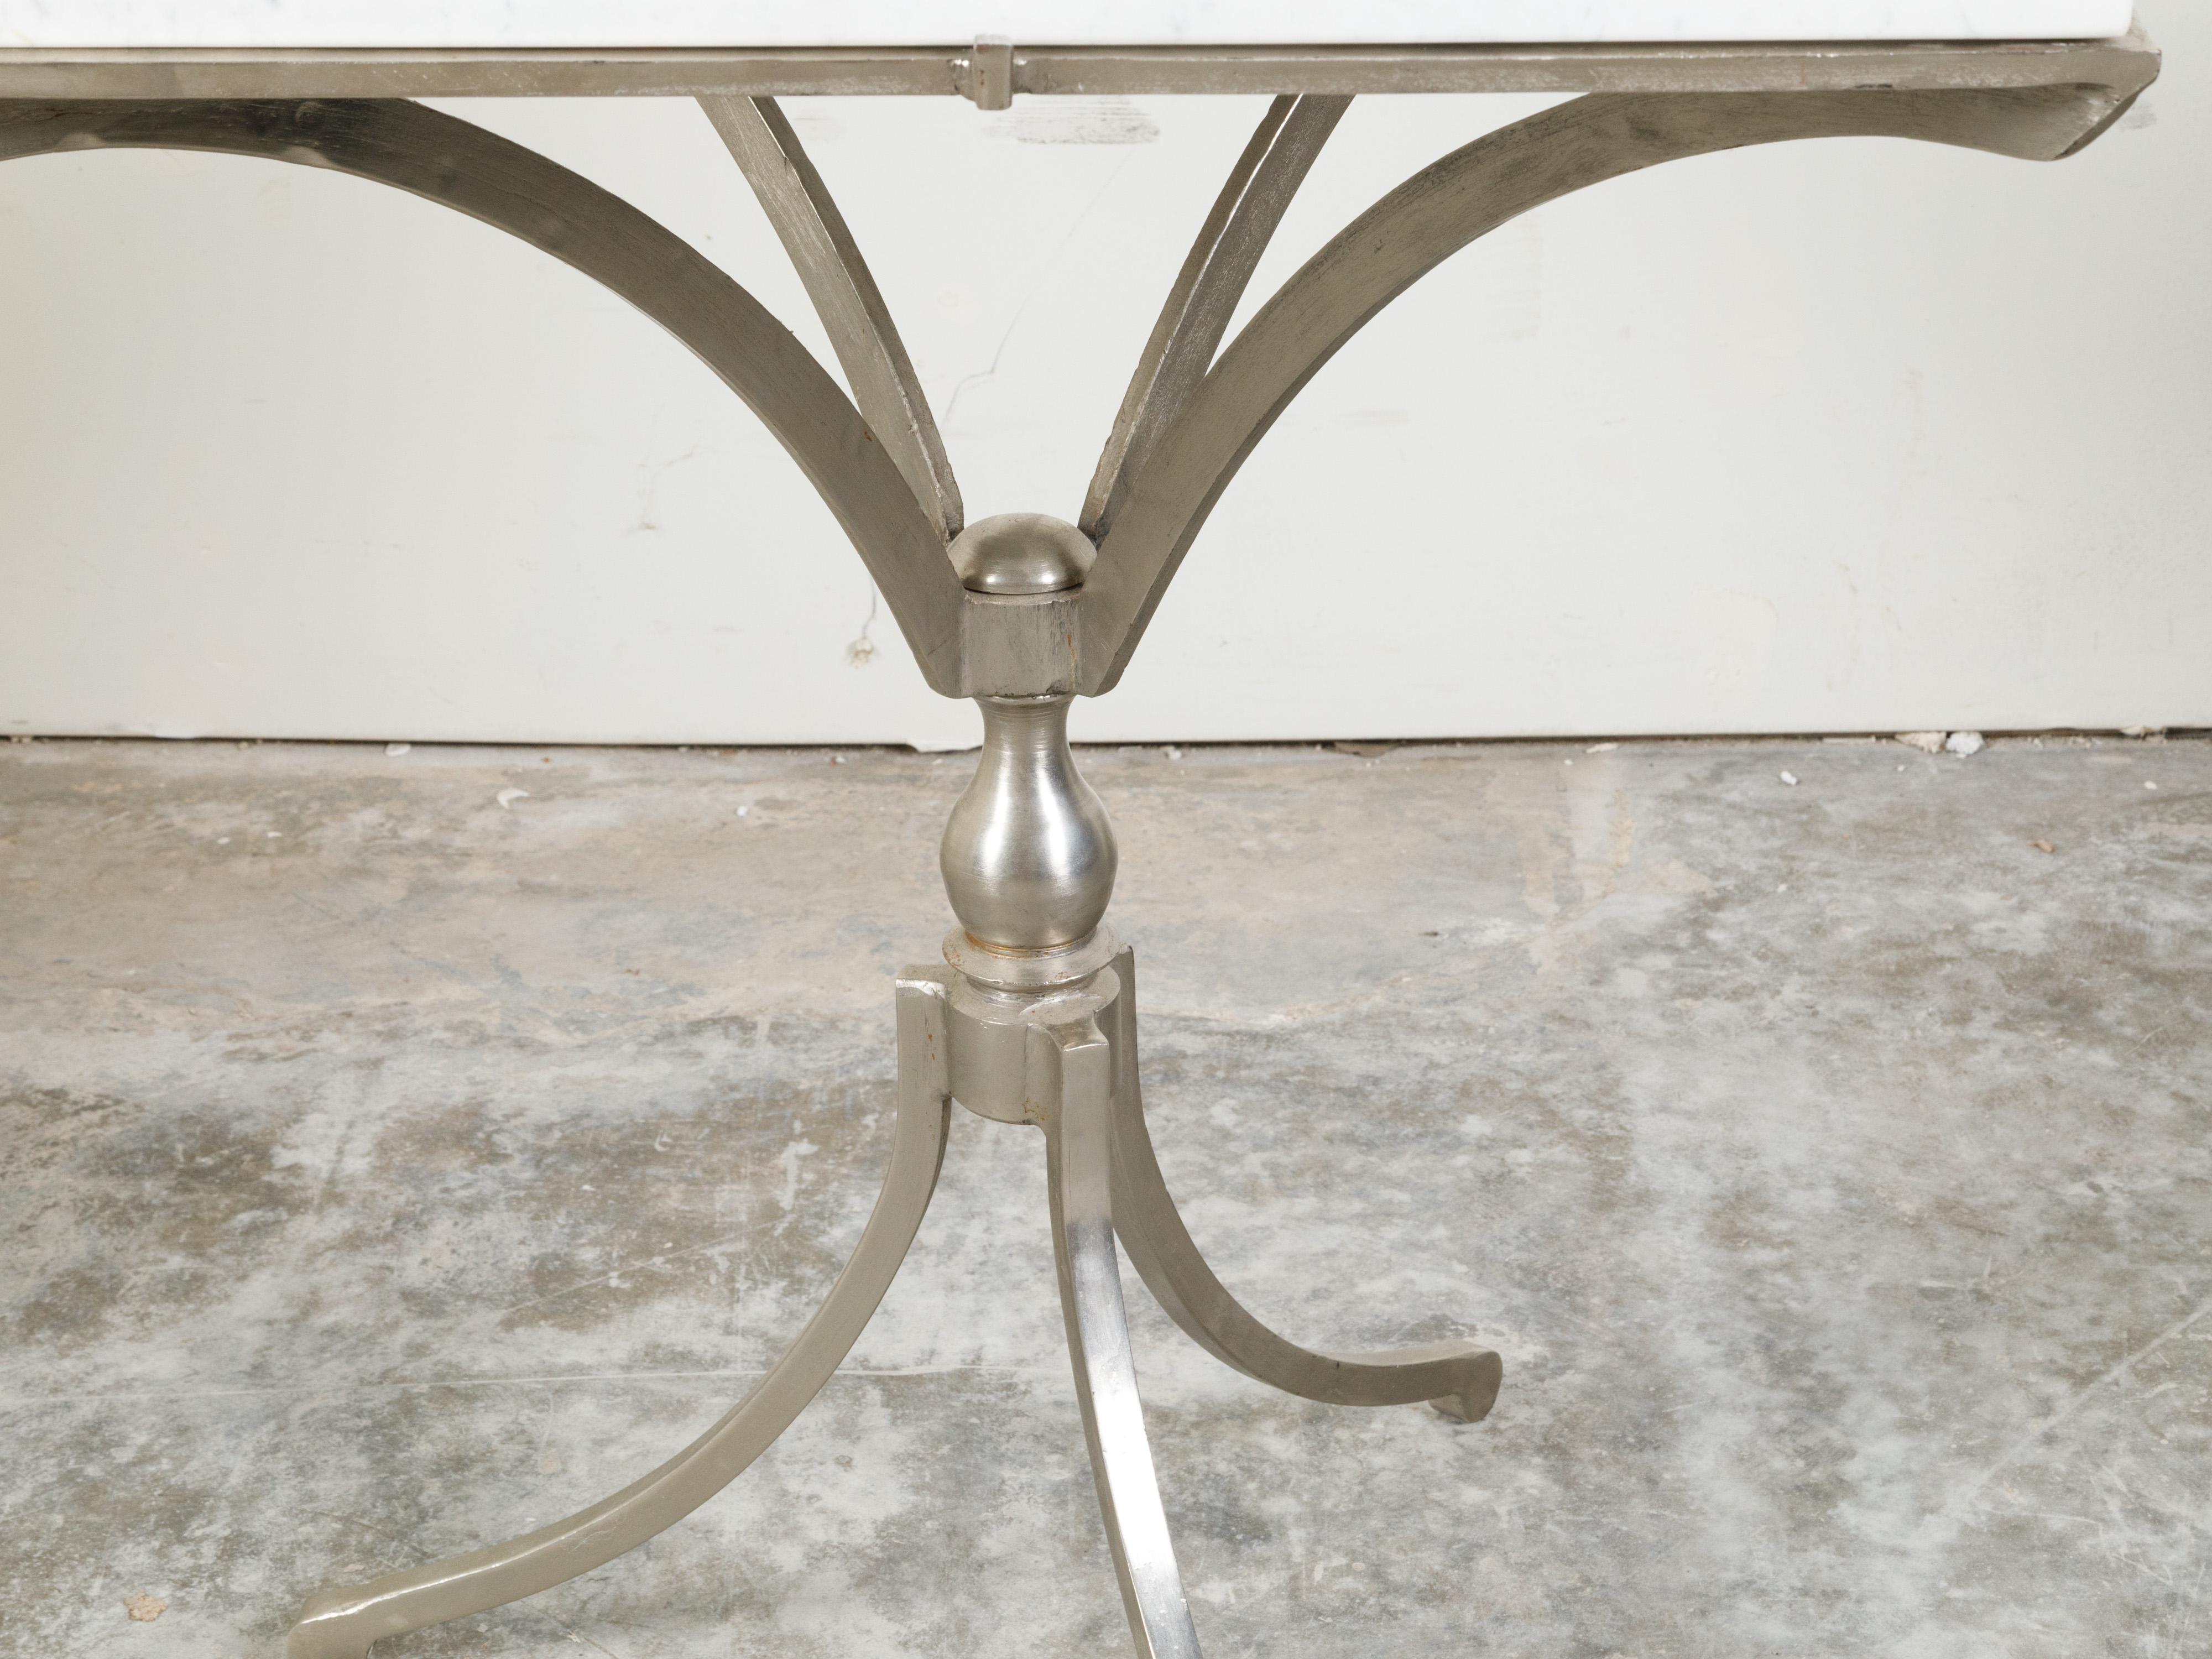 Italian Midcentury Steel Table with White Marble Top and Tripod Base For Sale 5